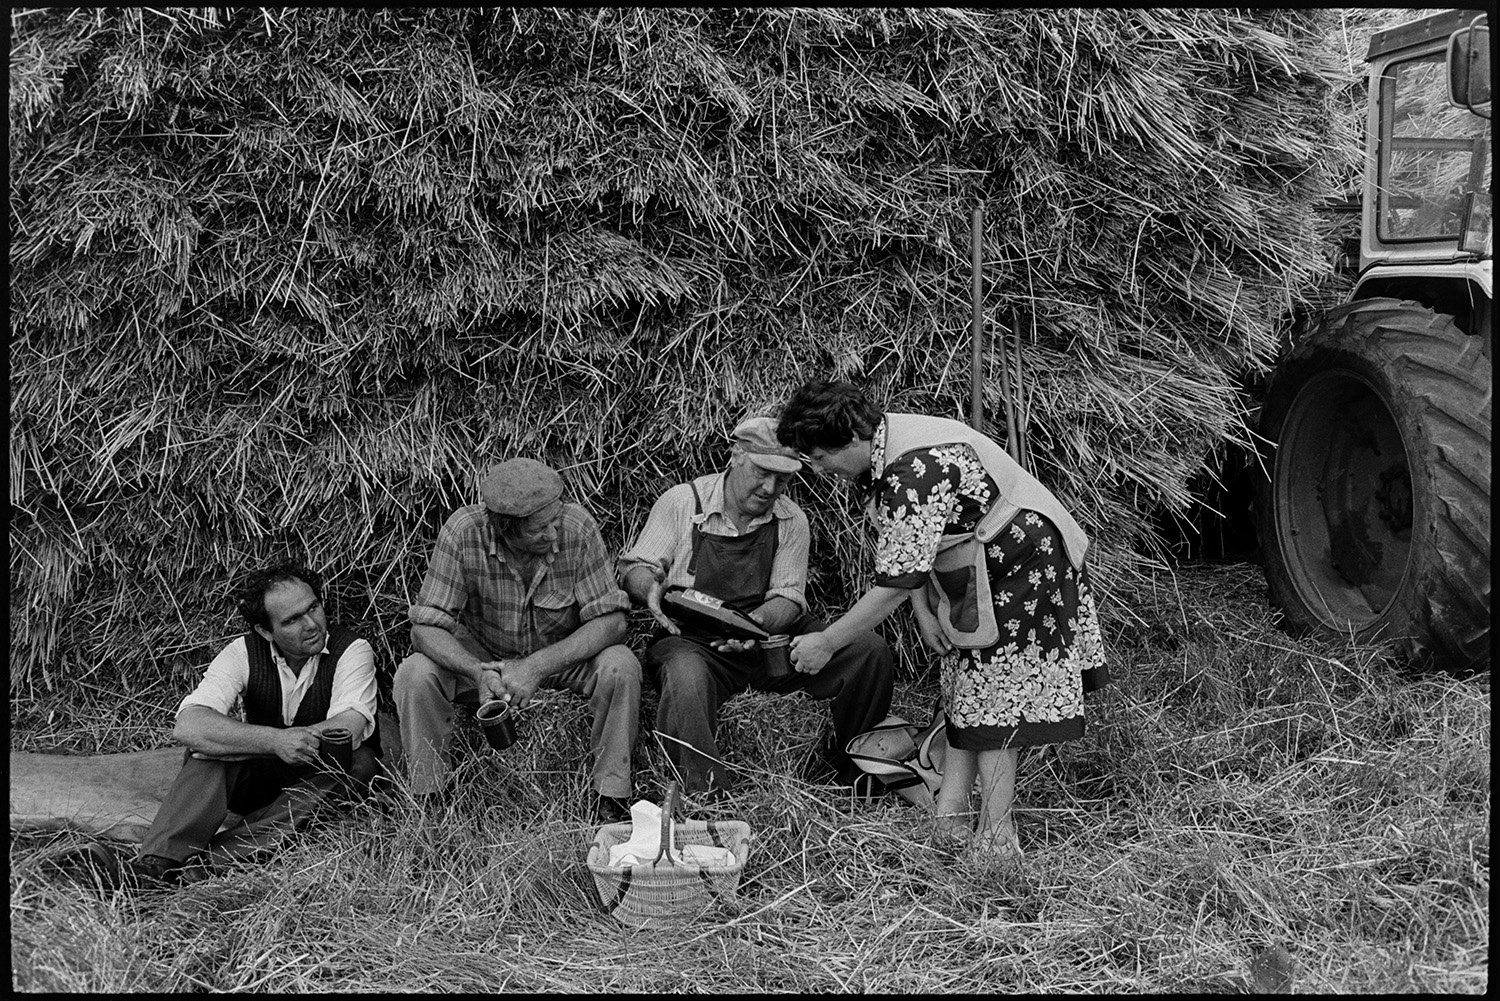 Men building wheatrick, having tea break, farmers wife with basket.
[Men having a tea break during building a wheat rick at Riddlecombe. They are sat under the rick. One of the men is pouring a drink from a bottle for the woman who has brought them a basket of food.]